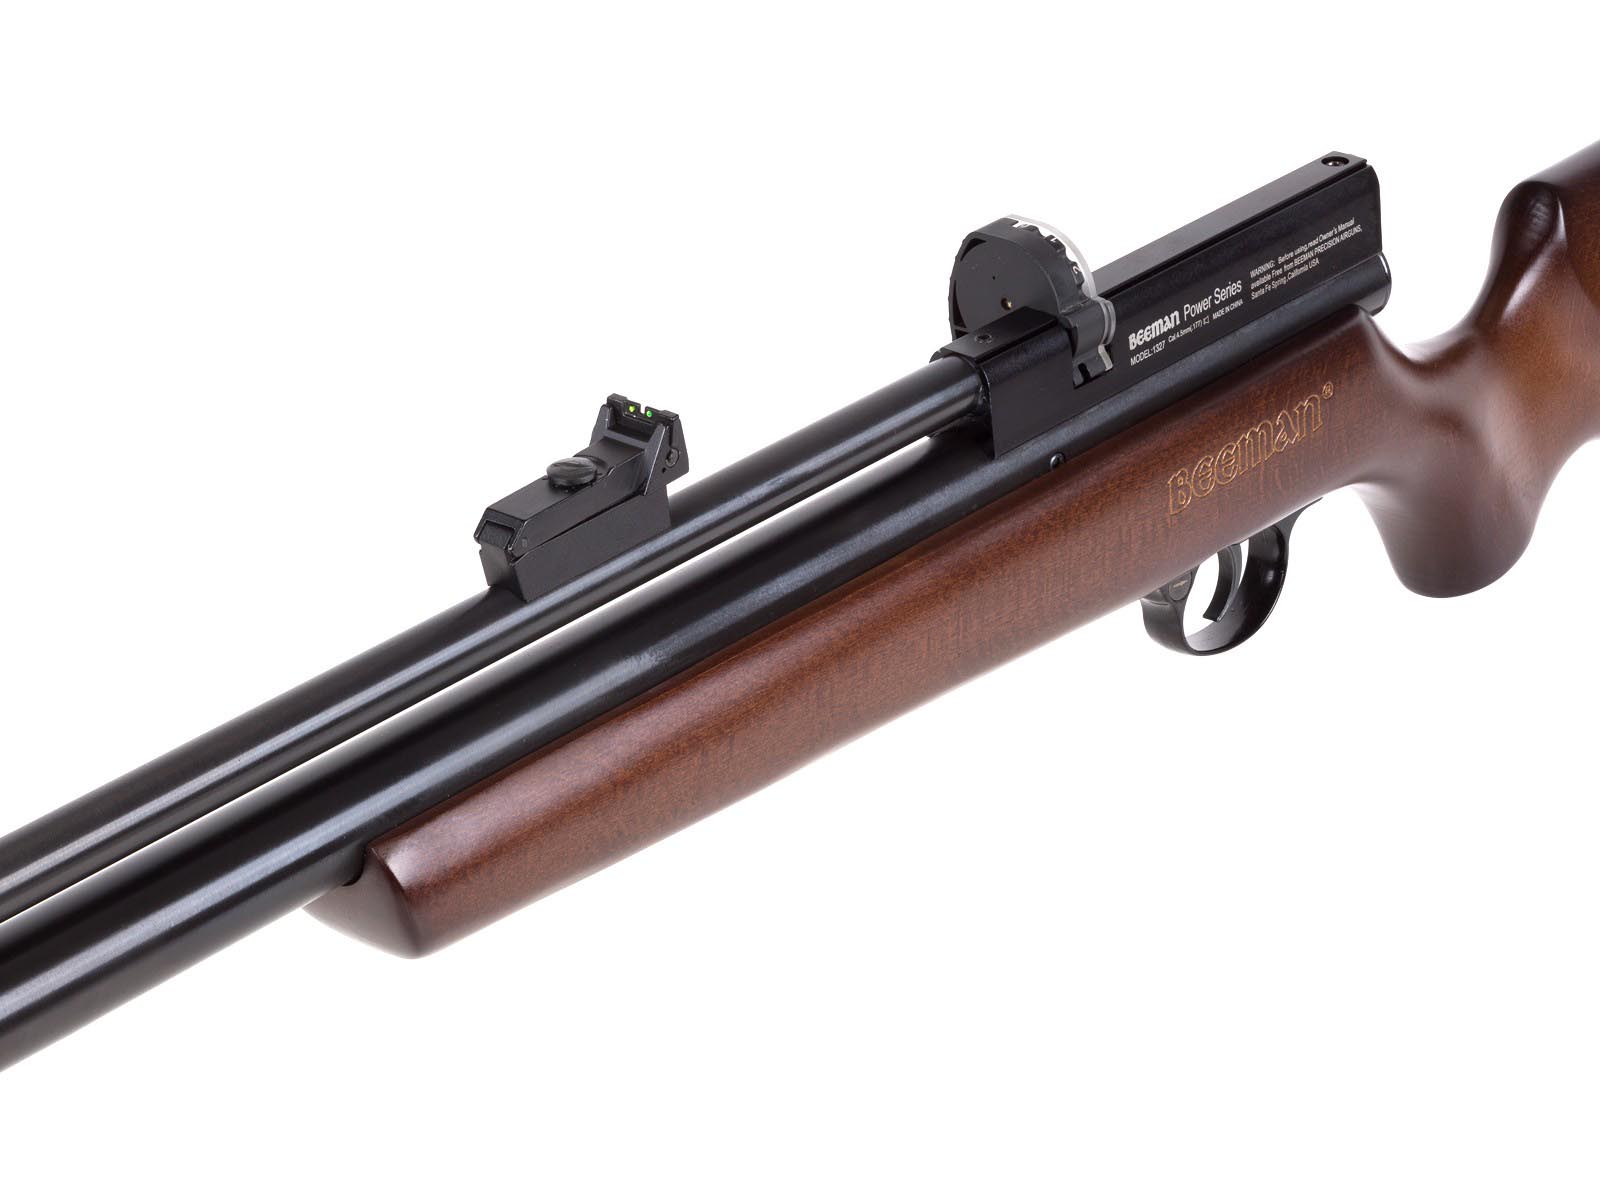 Beeman Chief II .177 Caliber Precharged Pneumatic Air Rifle for sale online 